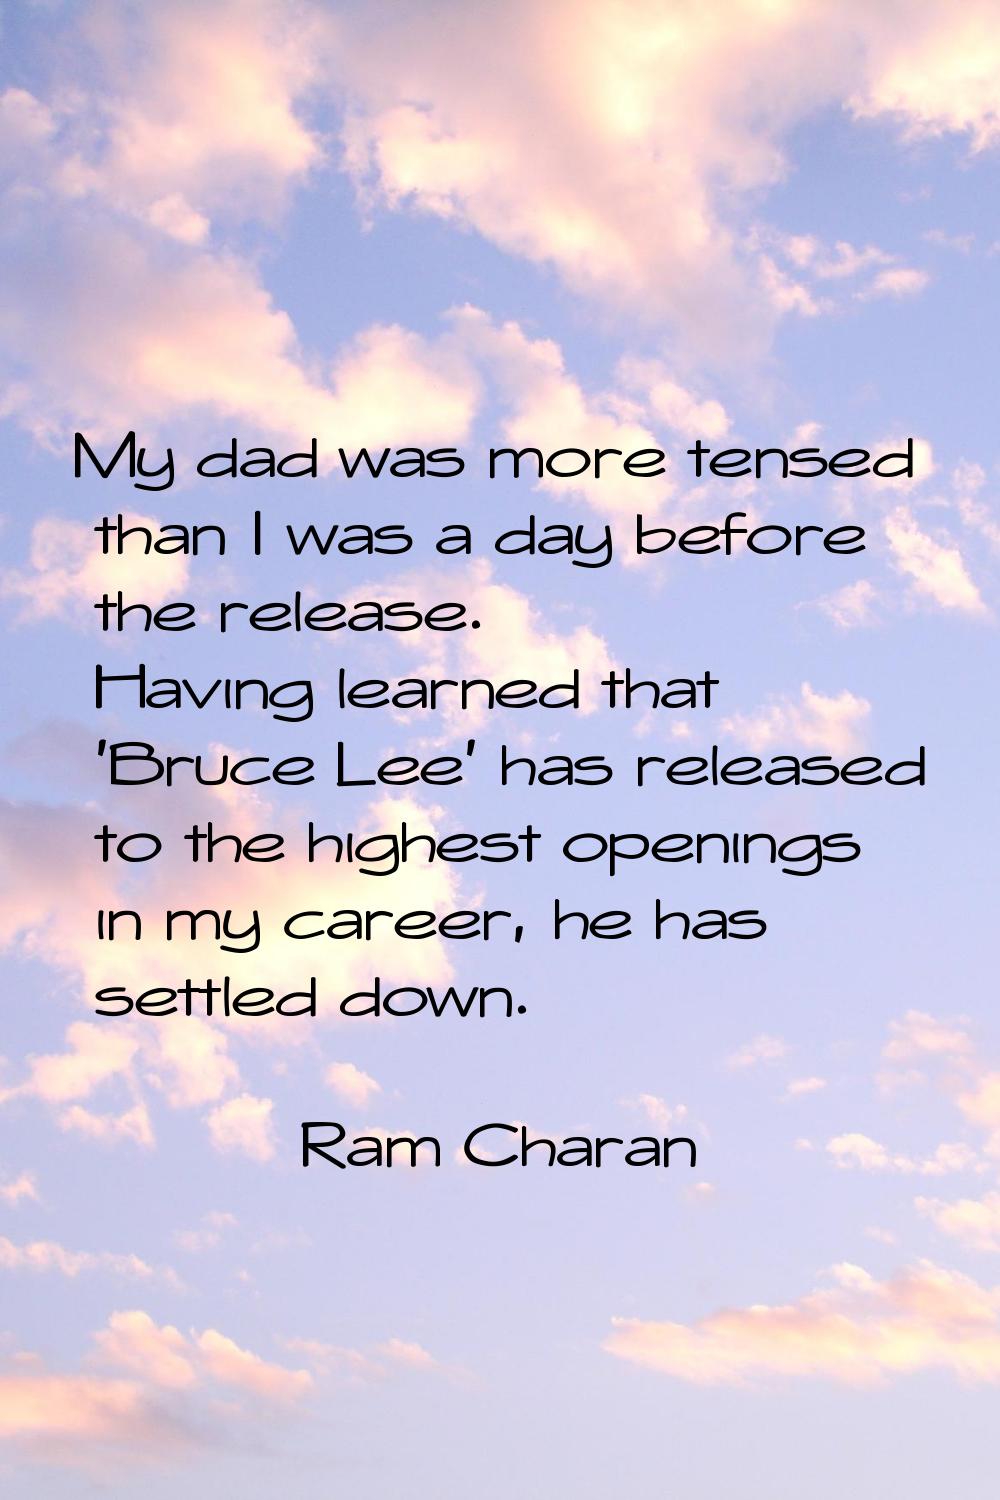 My dad was more tensed than I was a day before the release. Having learned that 'Bruce Lee' has rel